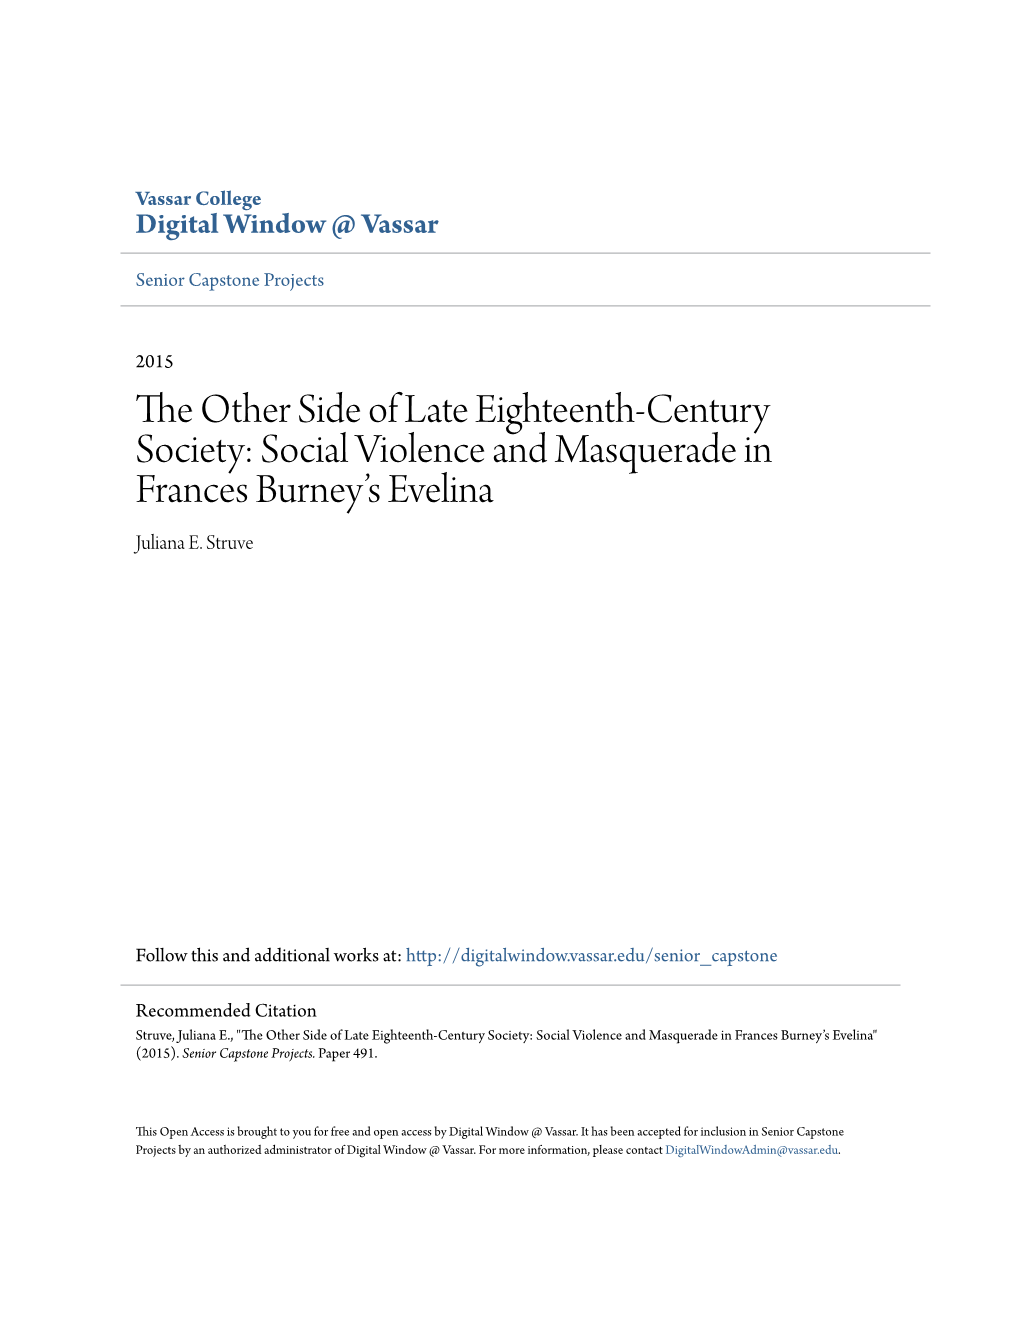 Social Violence and Masquerade in Frances Burney's Evelina